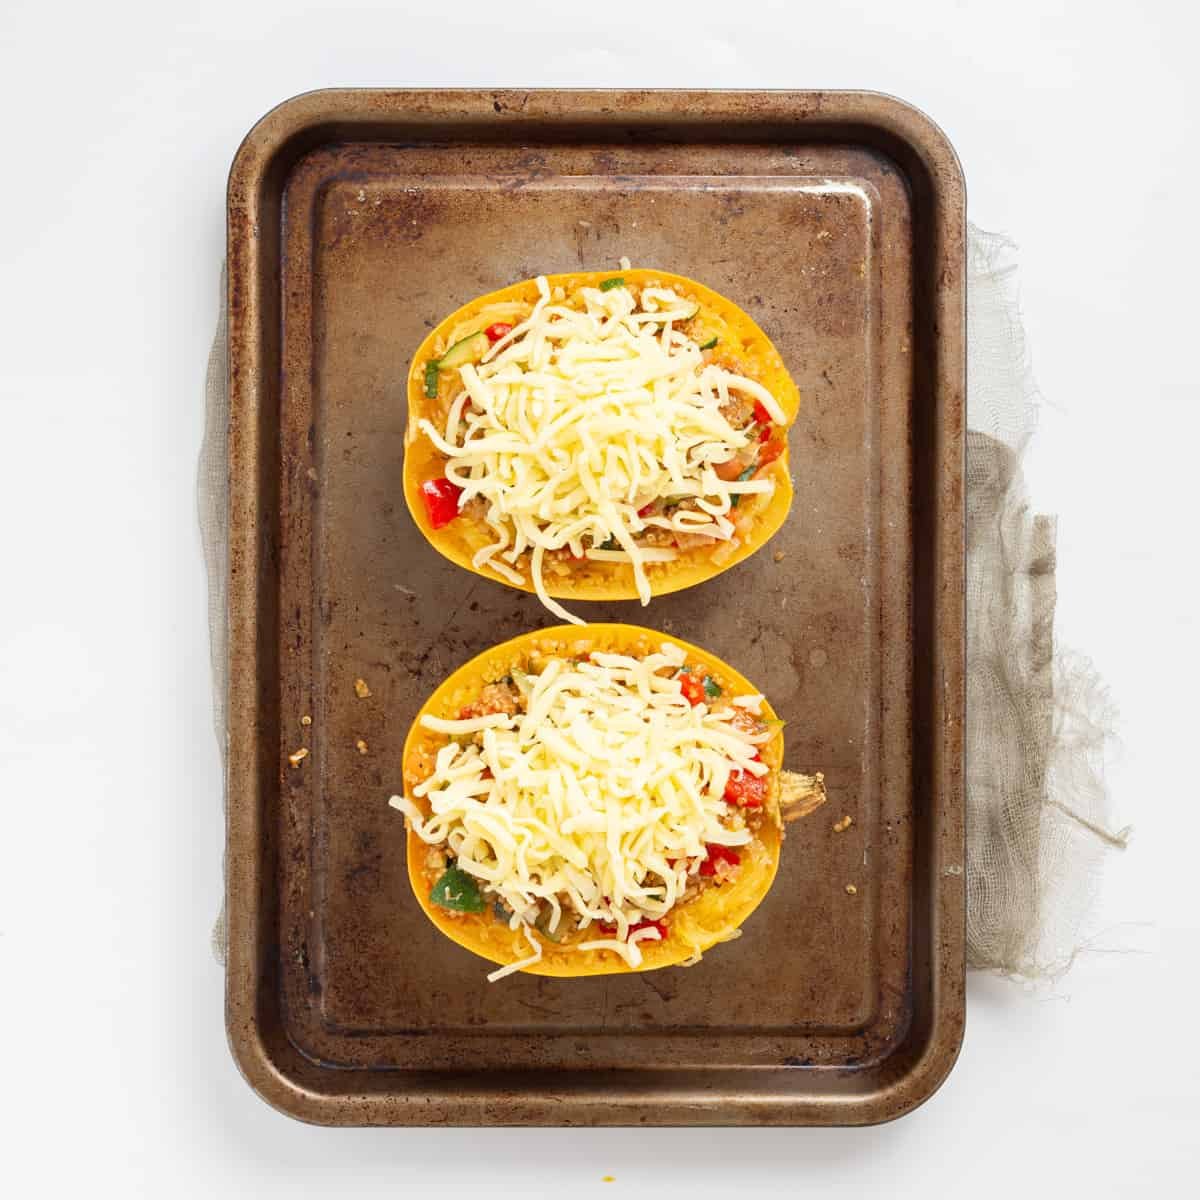 An image of mozzarella cheese being added on top of the stuffed squash.